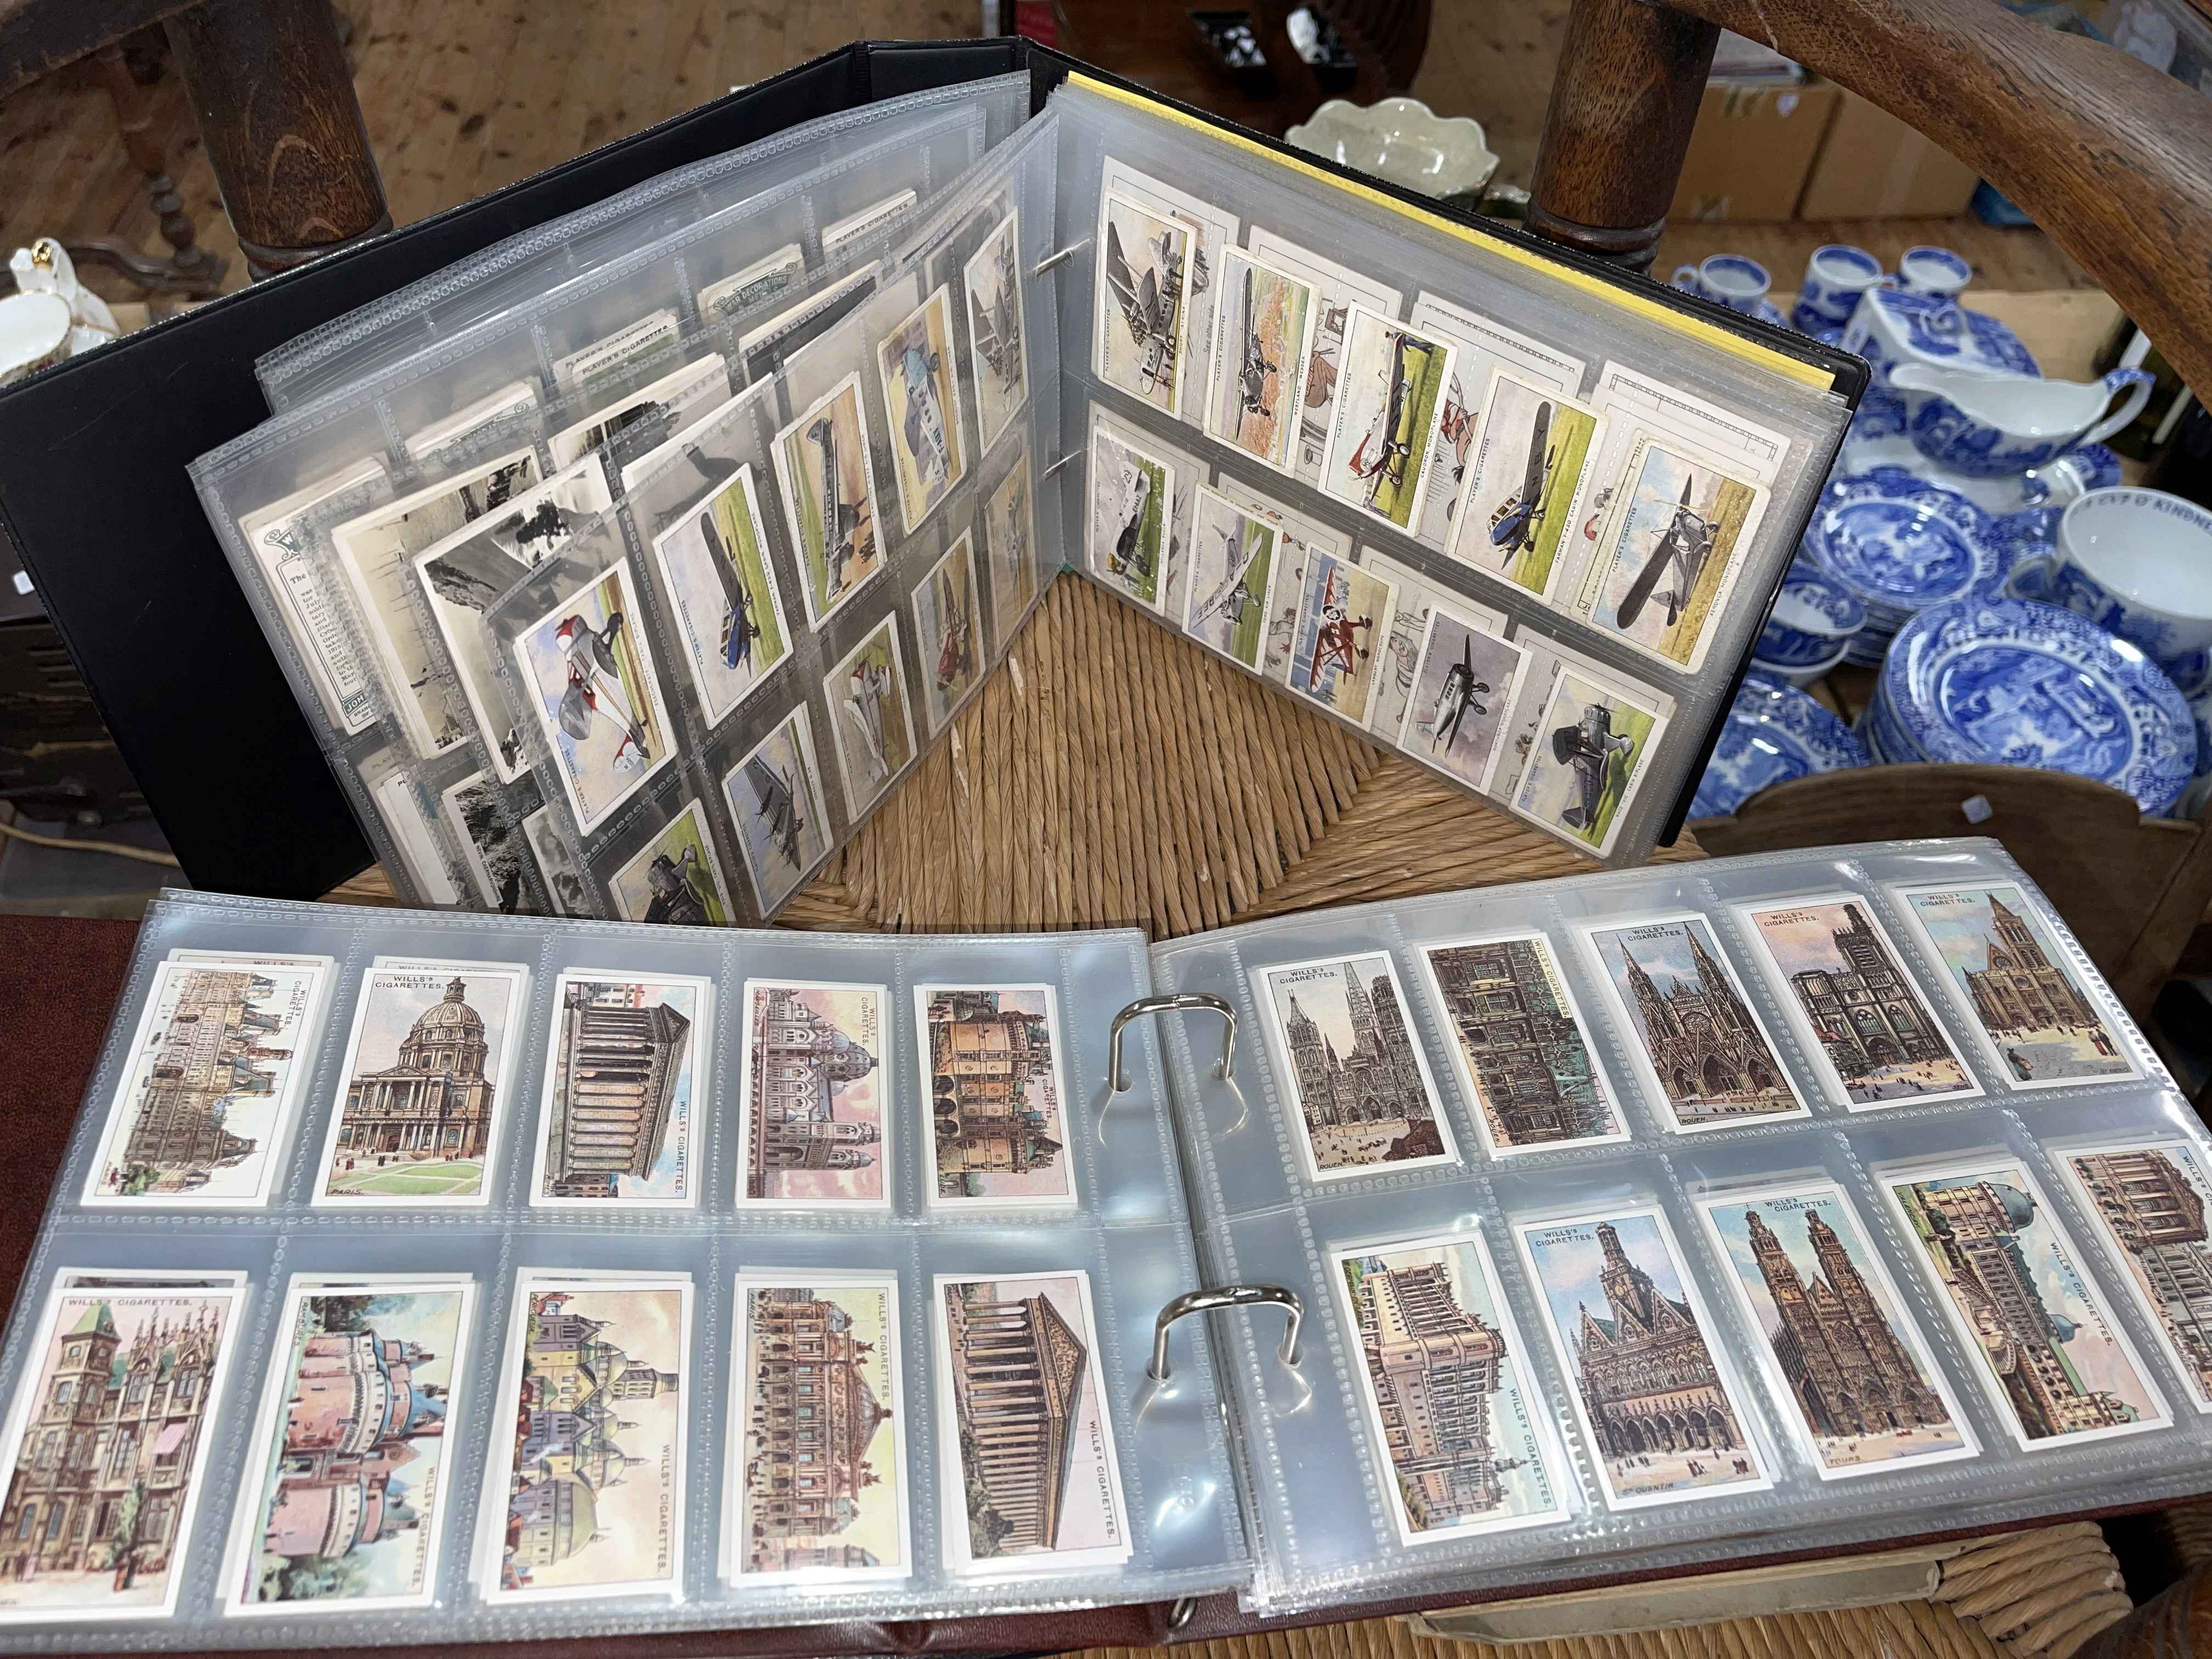 Collection of cigarette cards.